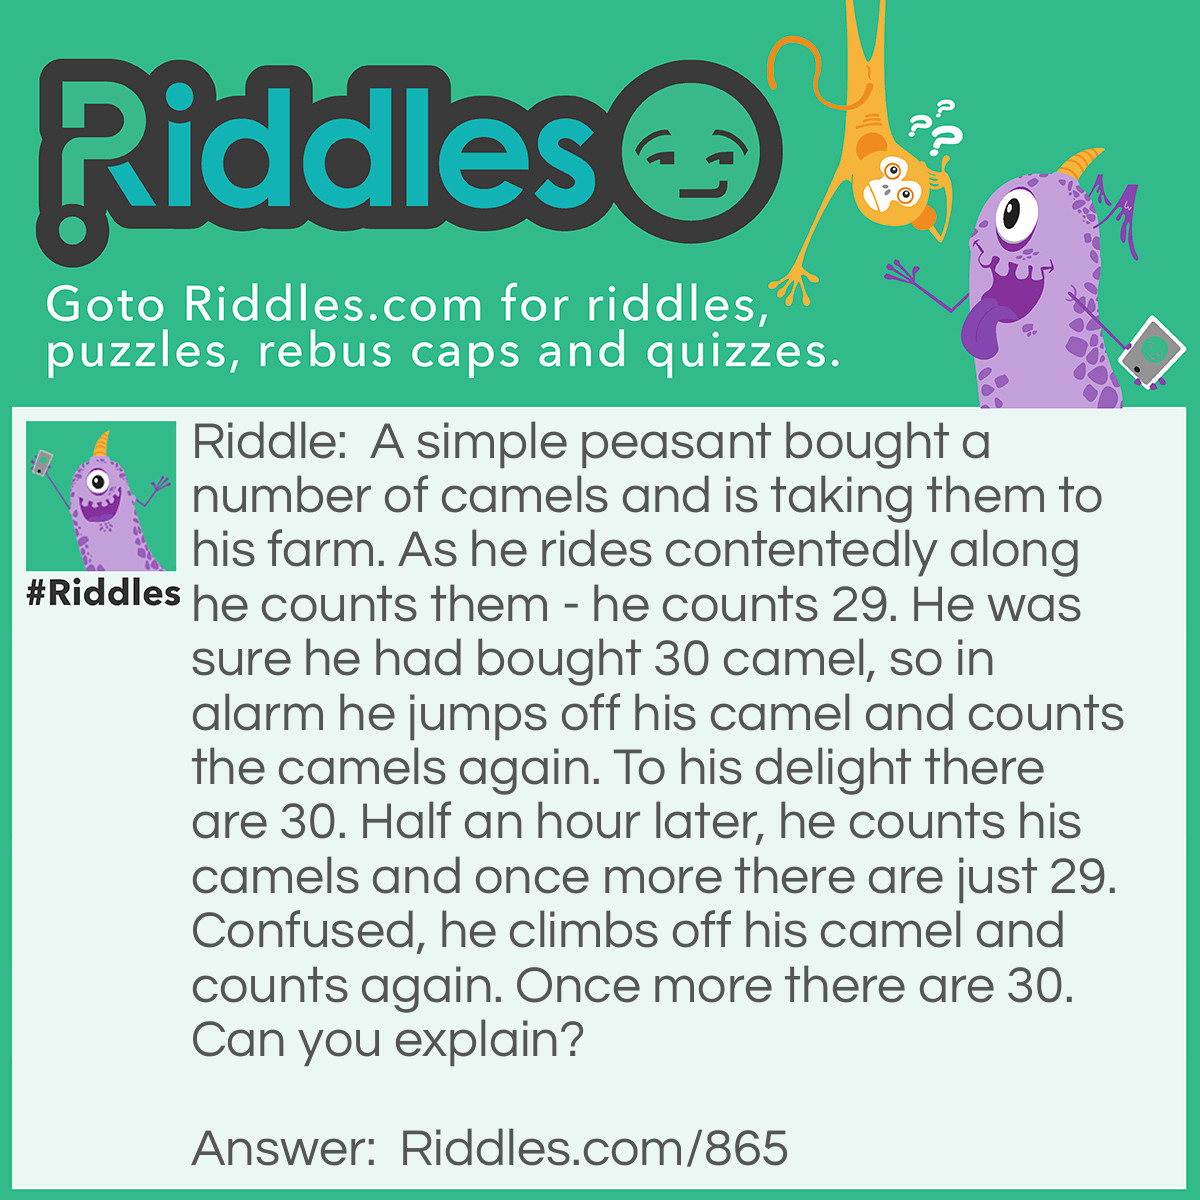 Riddle: A simple peasant bought a number of camels and is taking them to his farm. As he rides contentedly along he counts them - he counts 29. He was sure he had bought 30 camel, so in alarm he jumps off his camel and counts the camels again. To his delight there are 30. Half an hour later, he counts his camels and once more there are just 29. Confused, he climbs off his camel and counts again. Once more there are 30. Can you explain? Answer: When he is on the camel he omits to count it.